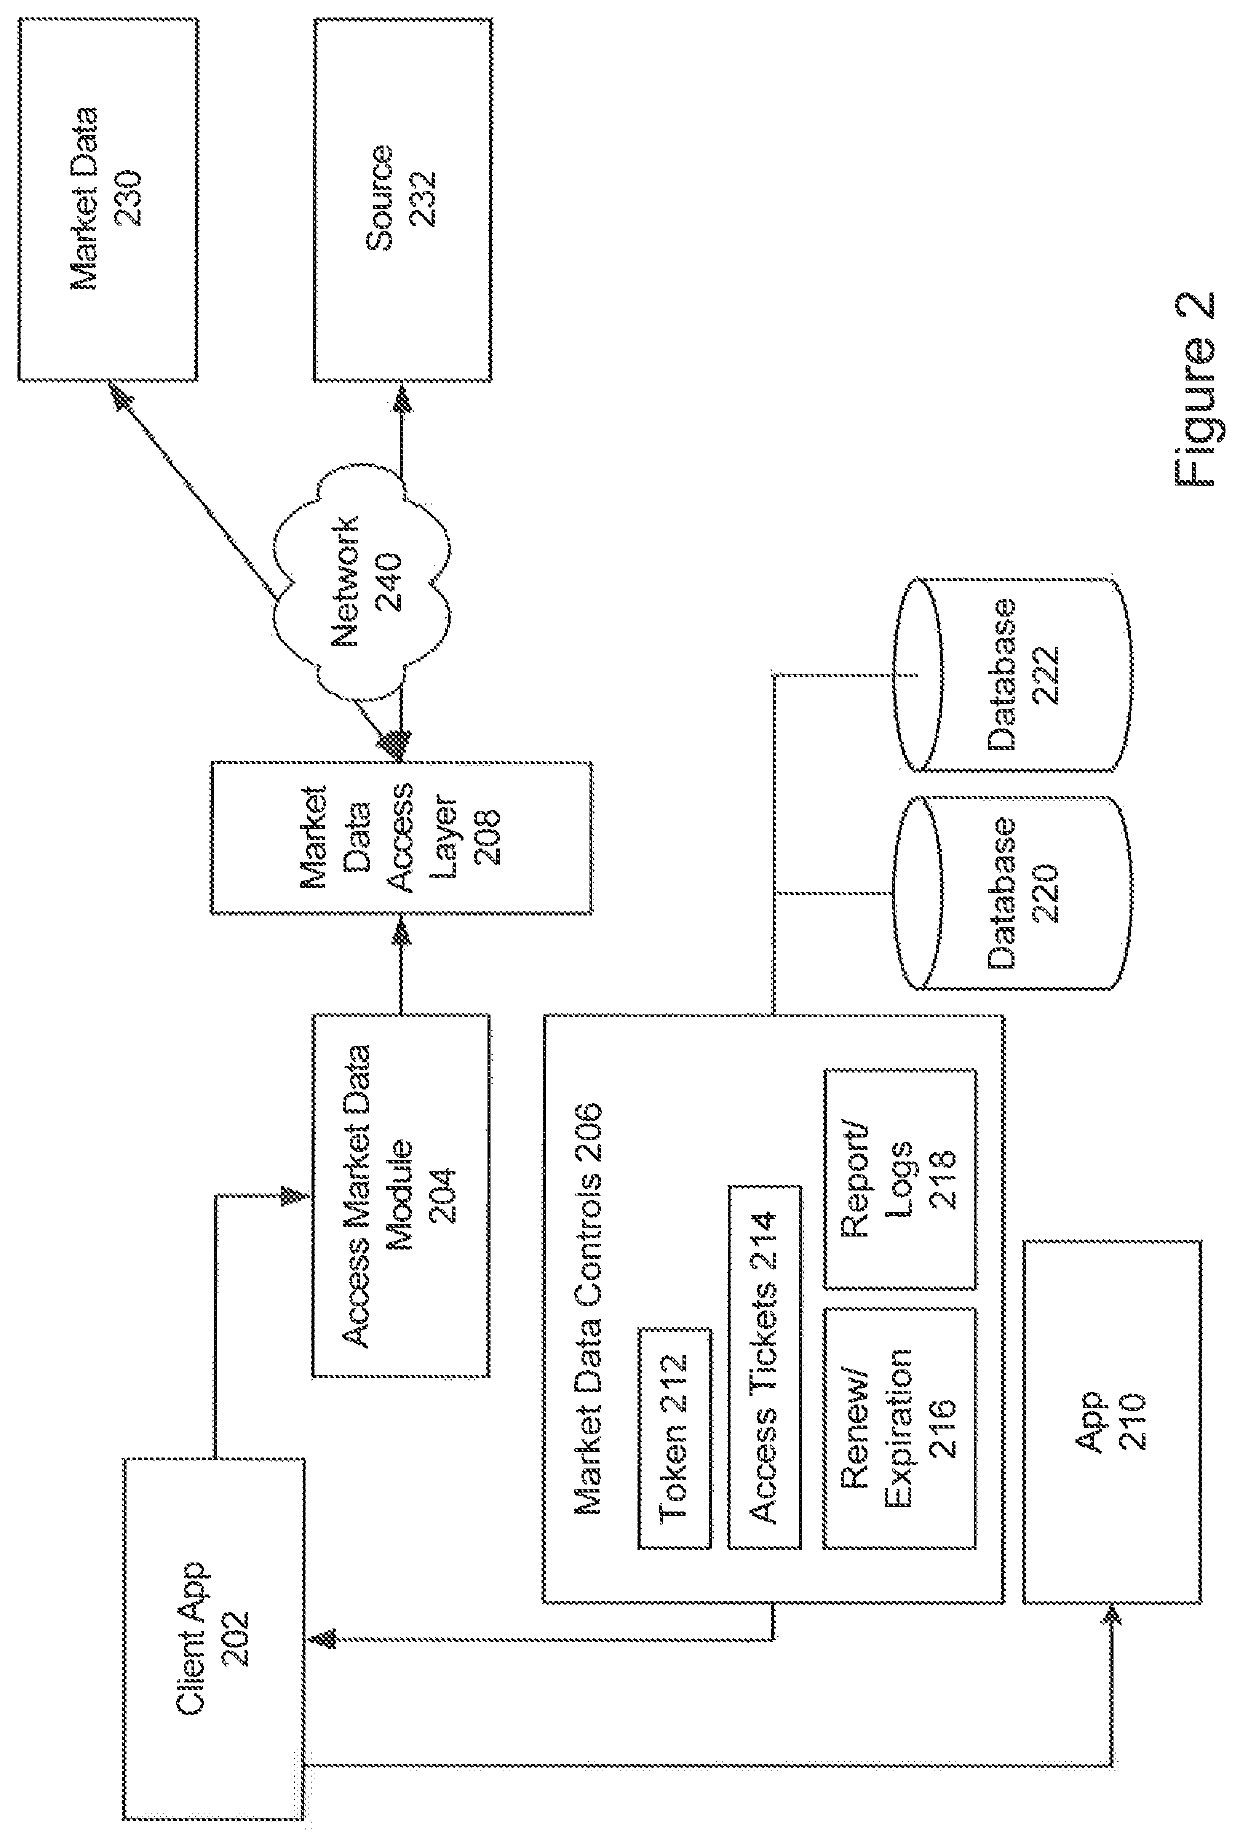 System and method for implementing market data rights enforcement